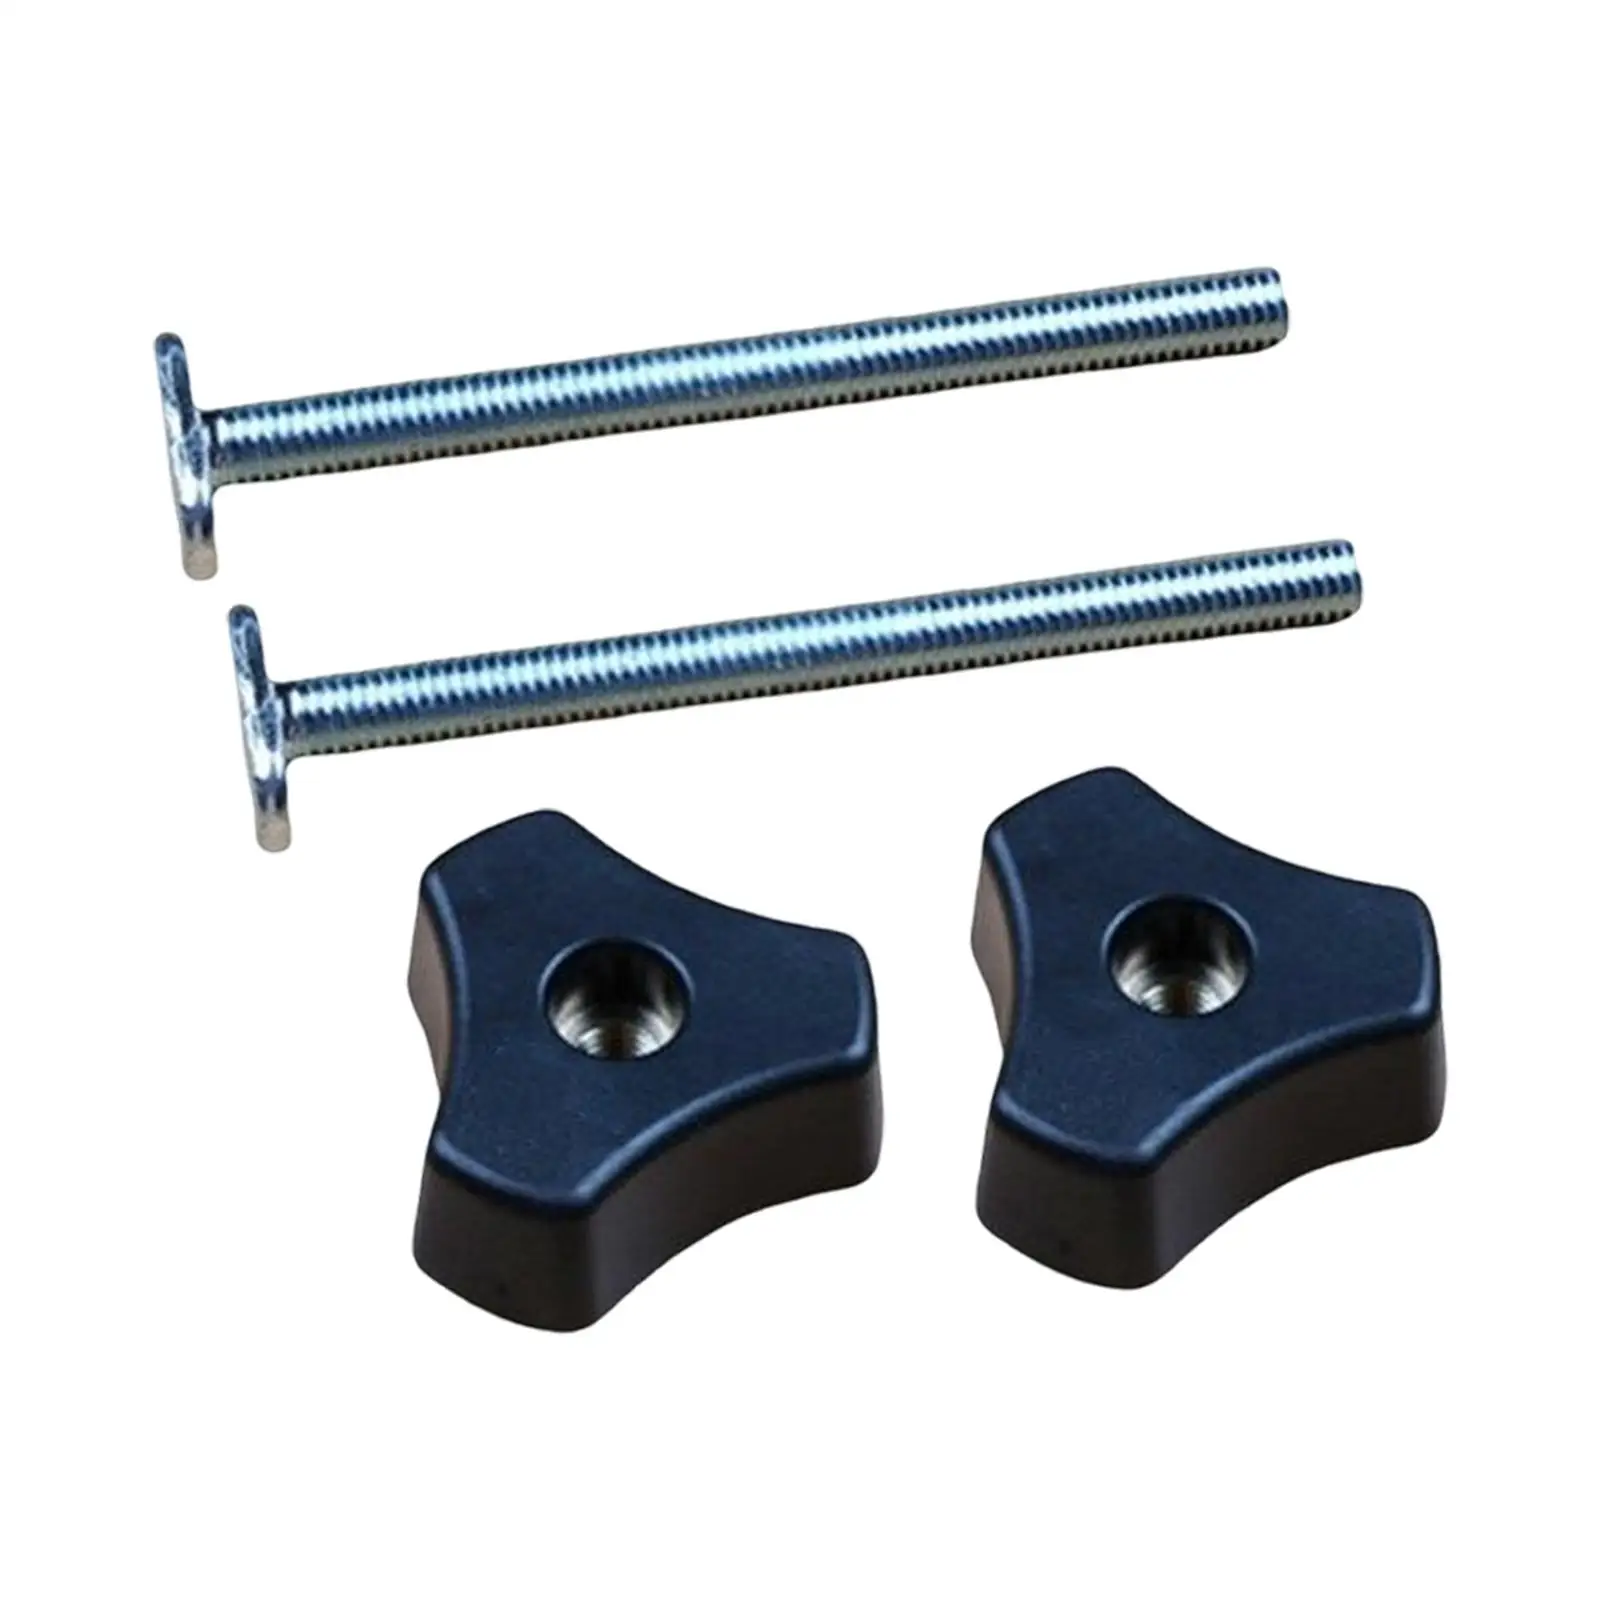 Heavy Duty T Slot Bolts and Knobs Hand Tools Portable Hardware M8 T track for Metalworking Clamping and Positioning